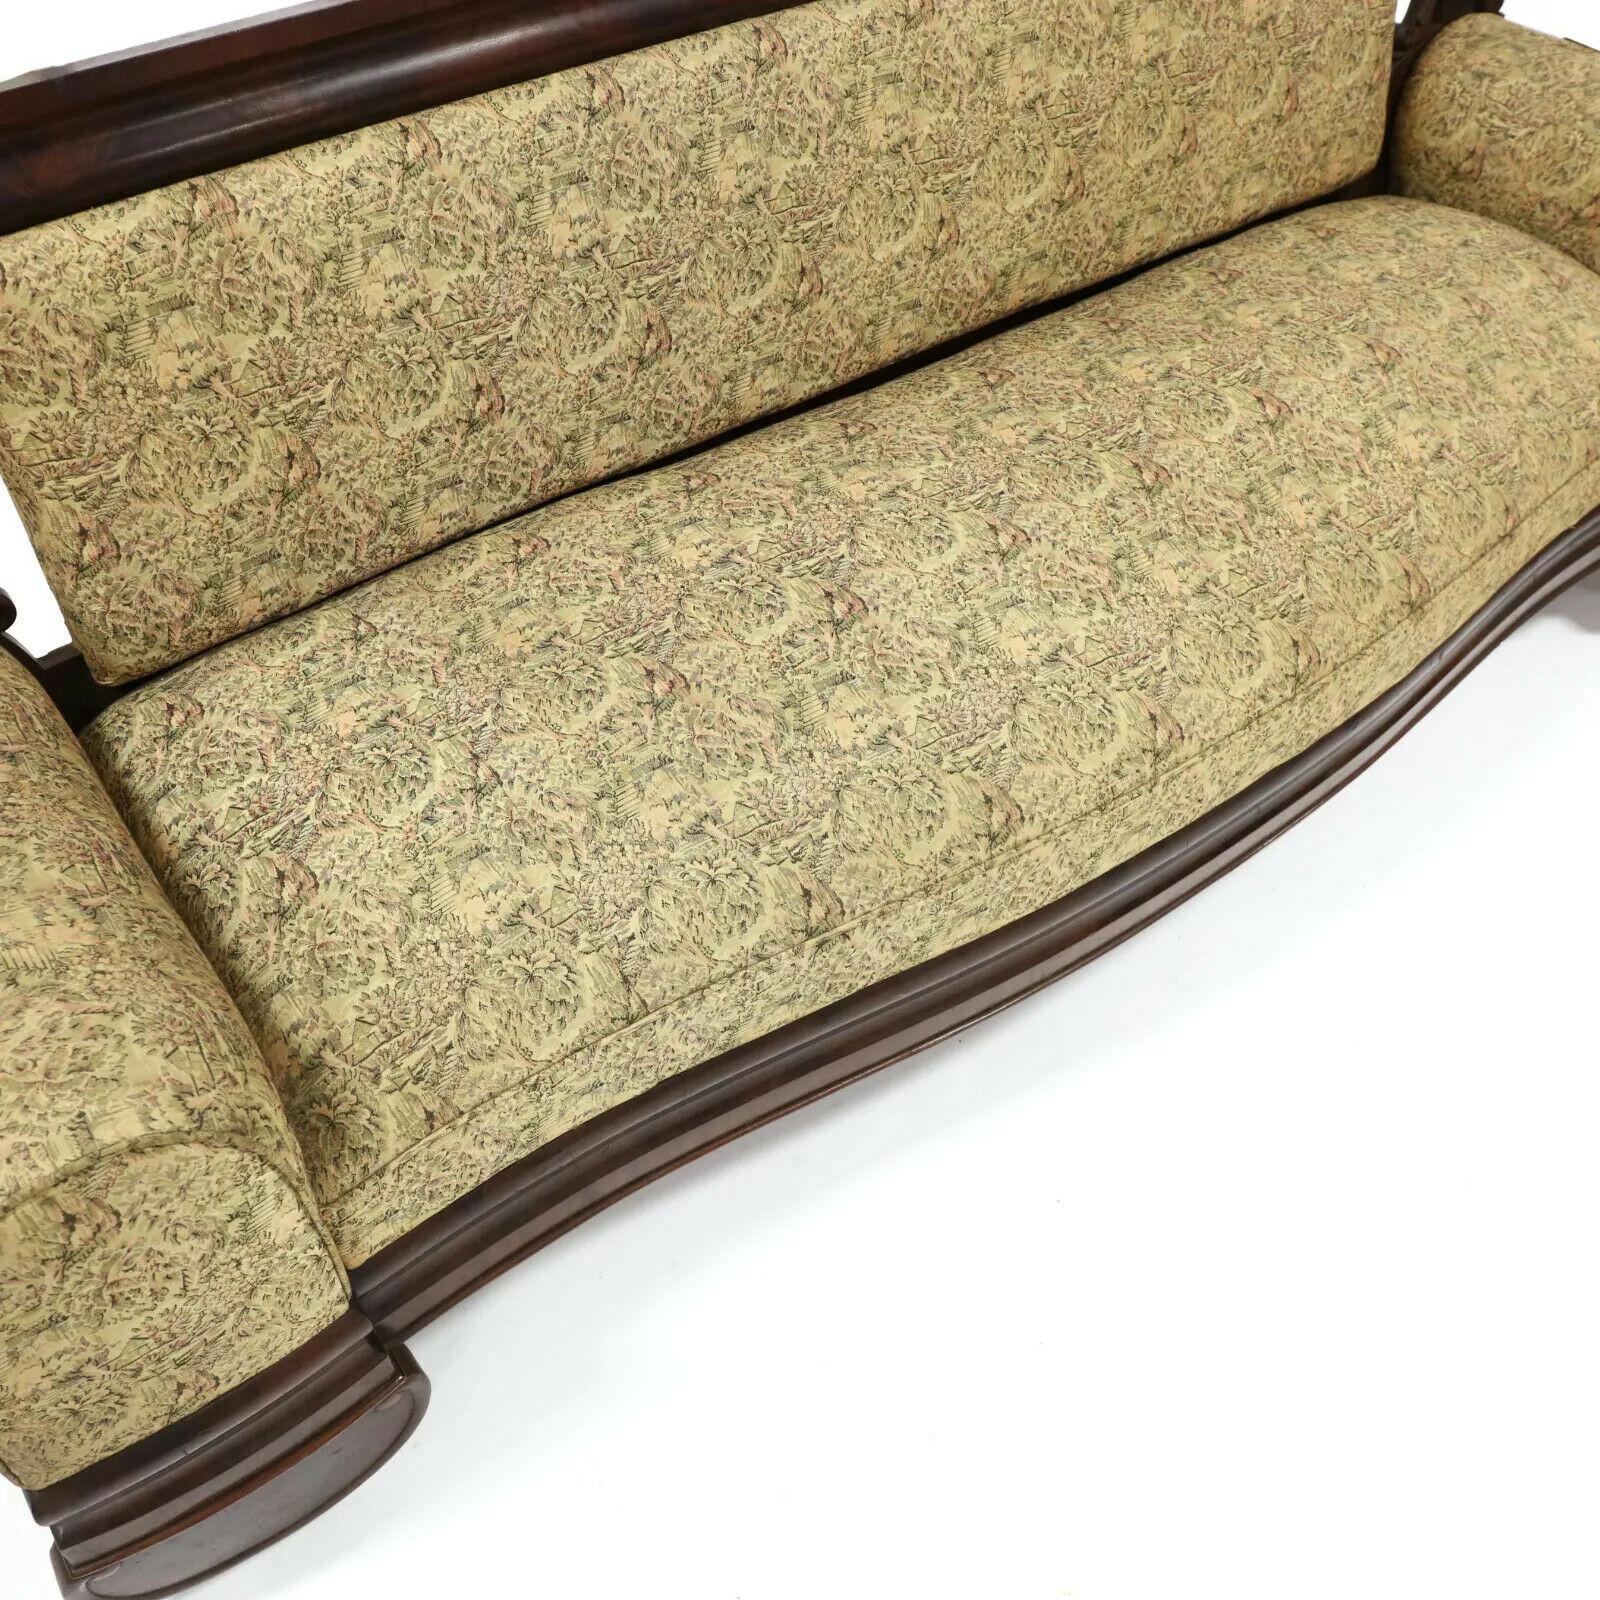 Handsome Antique Sofa, American Classical Mahogany, Tapestry Style Upholstery, Circa 1840's, 19th Century!!

Experience the charm of a classic American mahogany sofa from the mid-19th century with this antique piece. Upholstered in striking